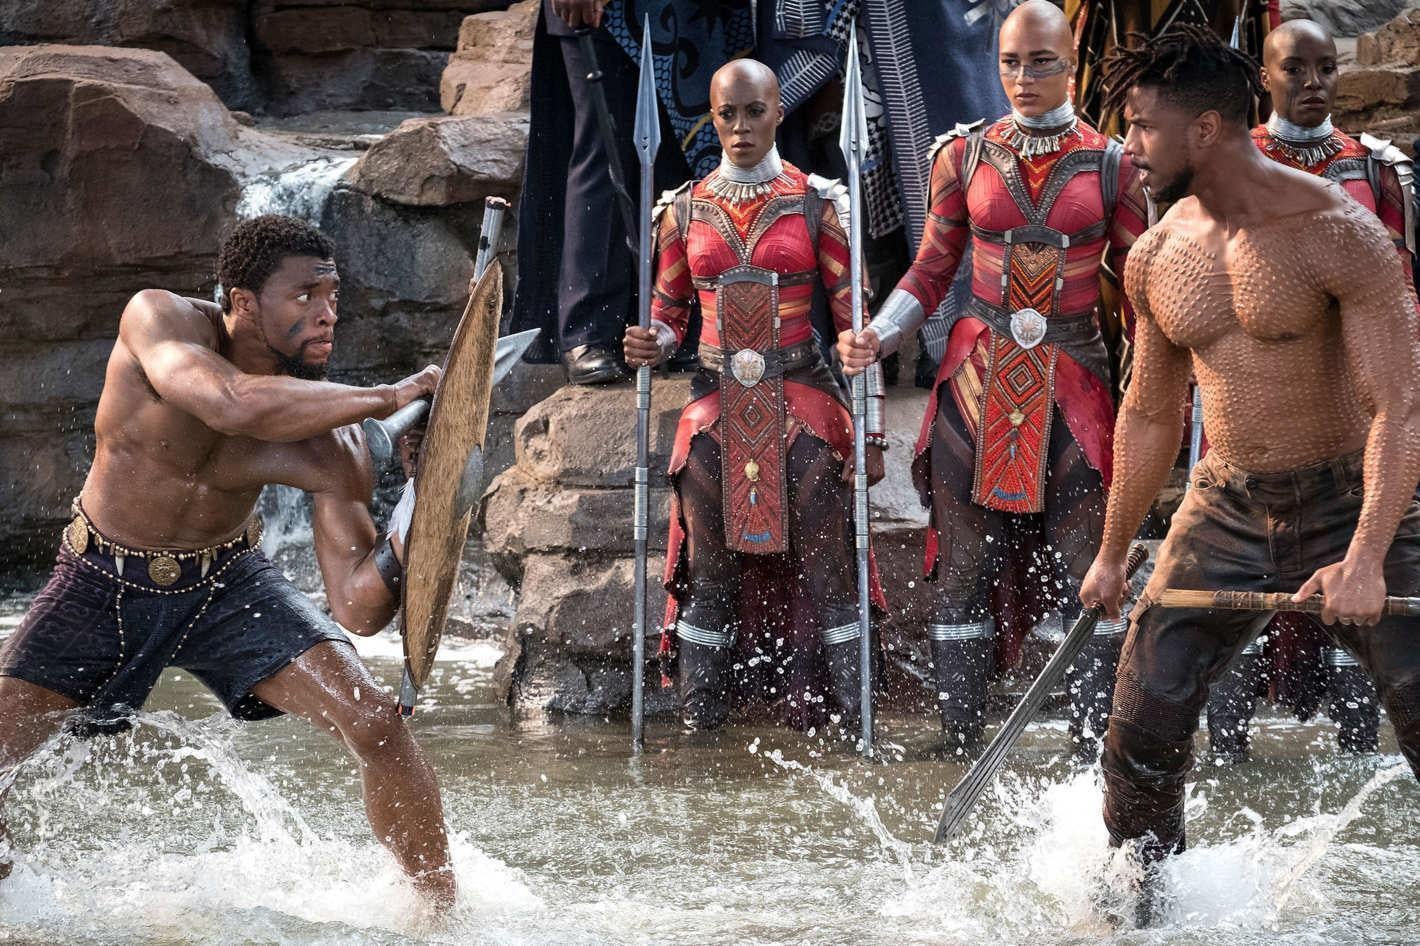 Morrison’s next project is ‘Black Panther’ starring Chadwick Boseman as T’Chall/Black Panther (left) and Michael B Jordan as Erik Killmonger (right). The film is out 12 February